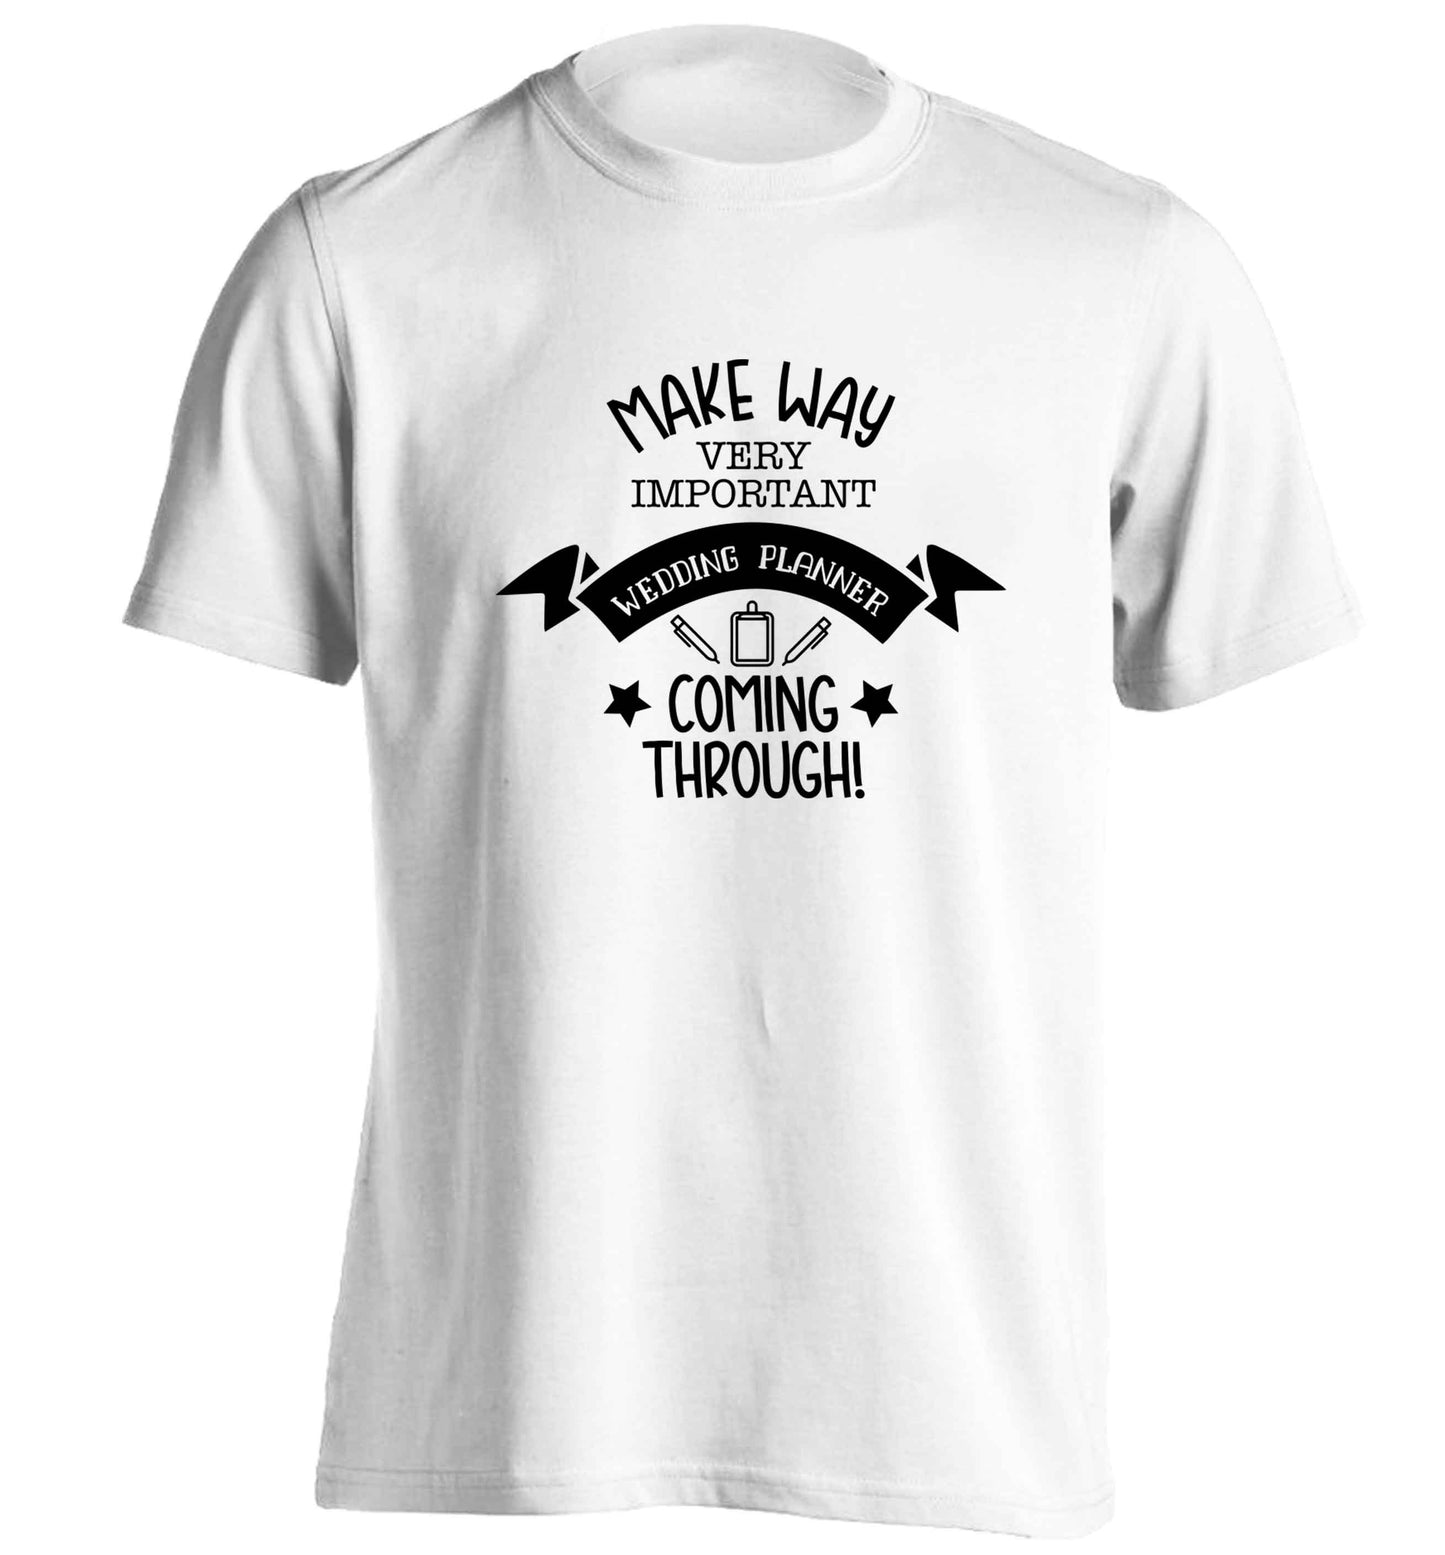 Make way very important wedding planner coming through adults unisex white Tshirt 2XL